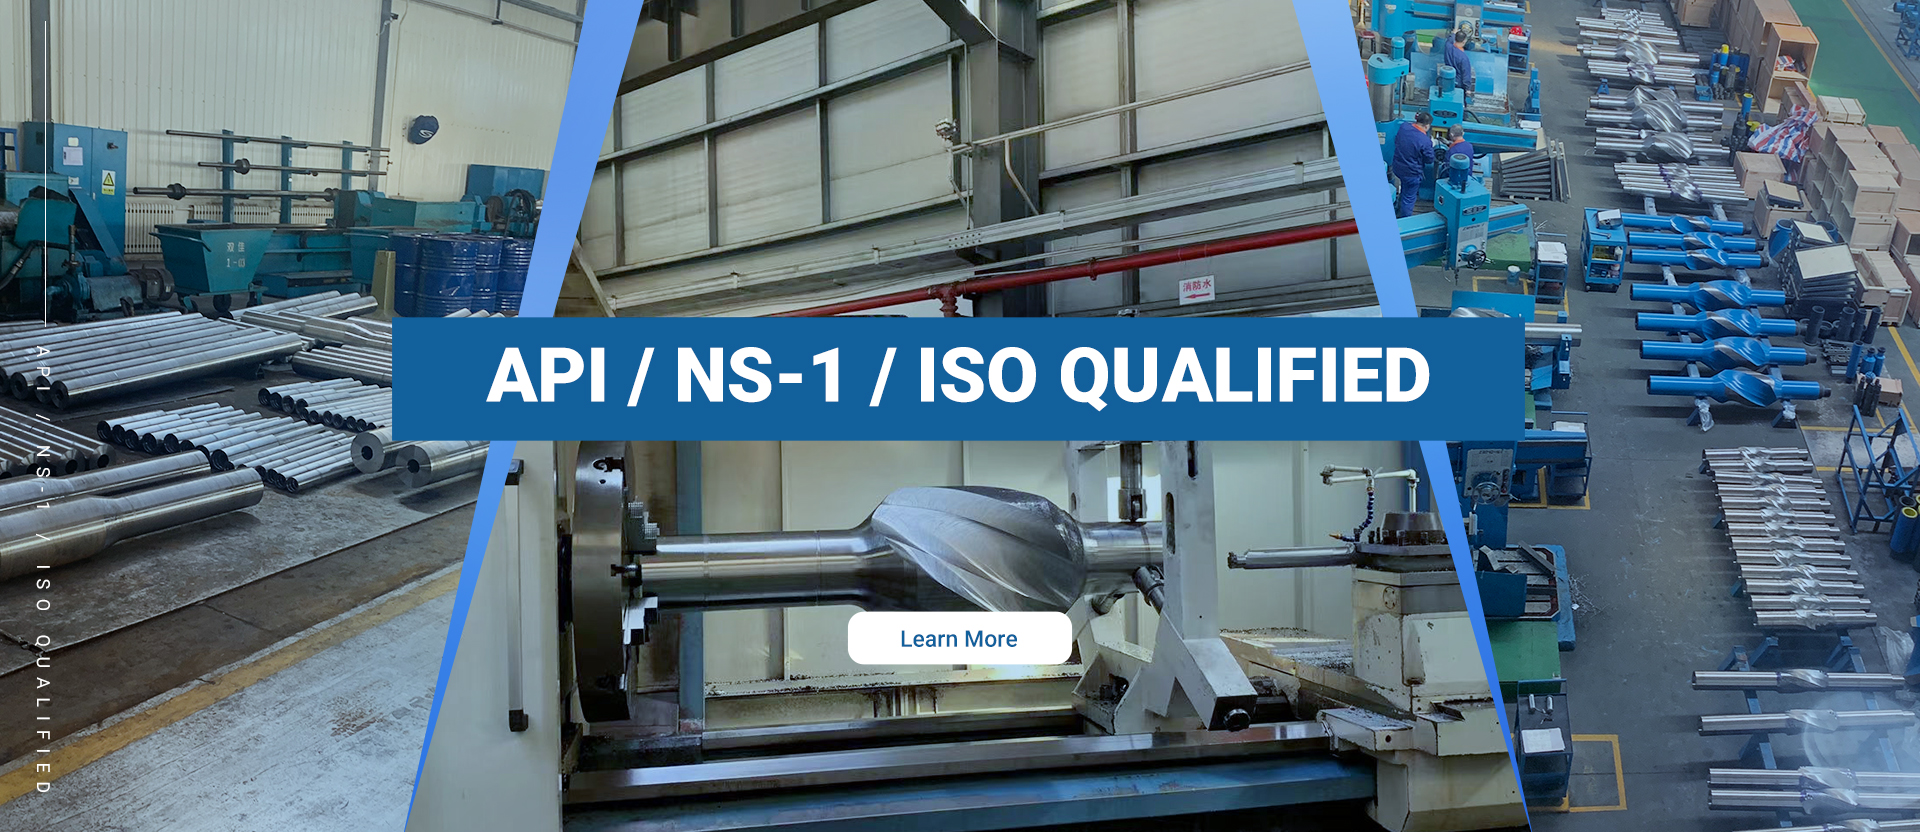 API / NS-1 / ISO QUALIFIED